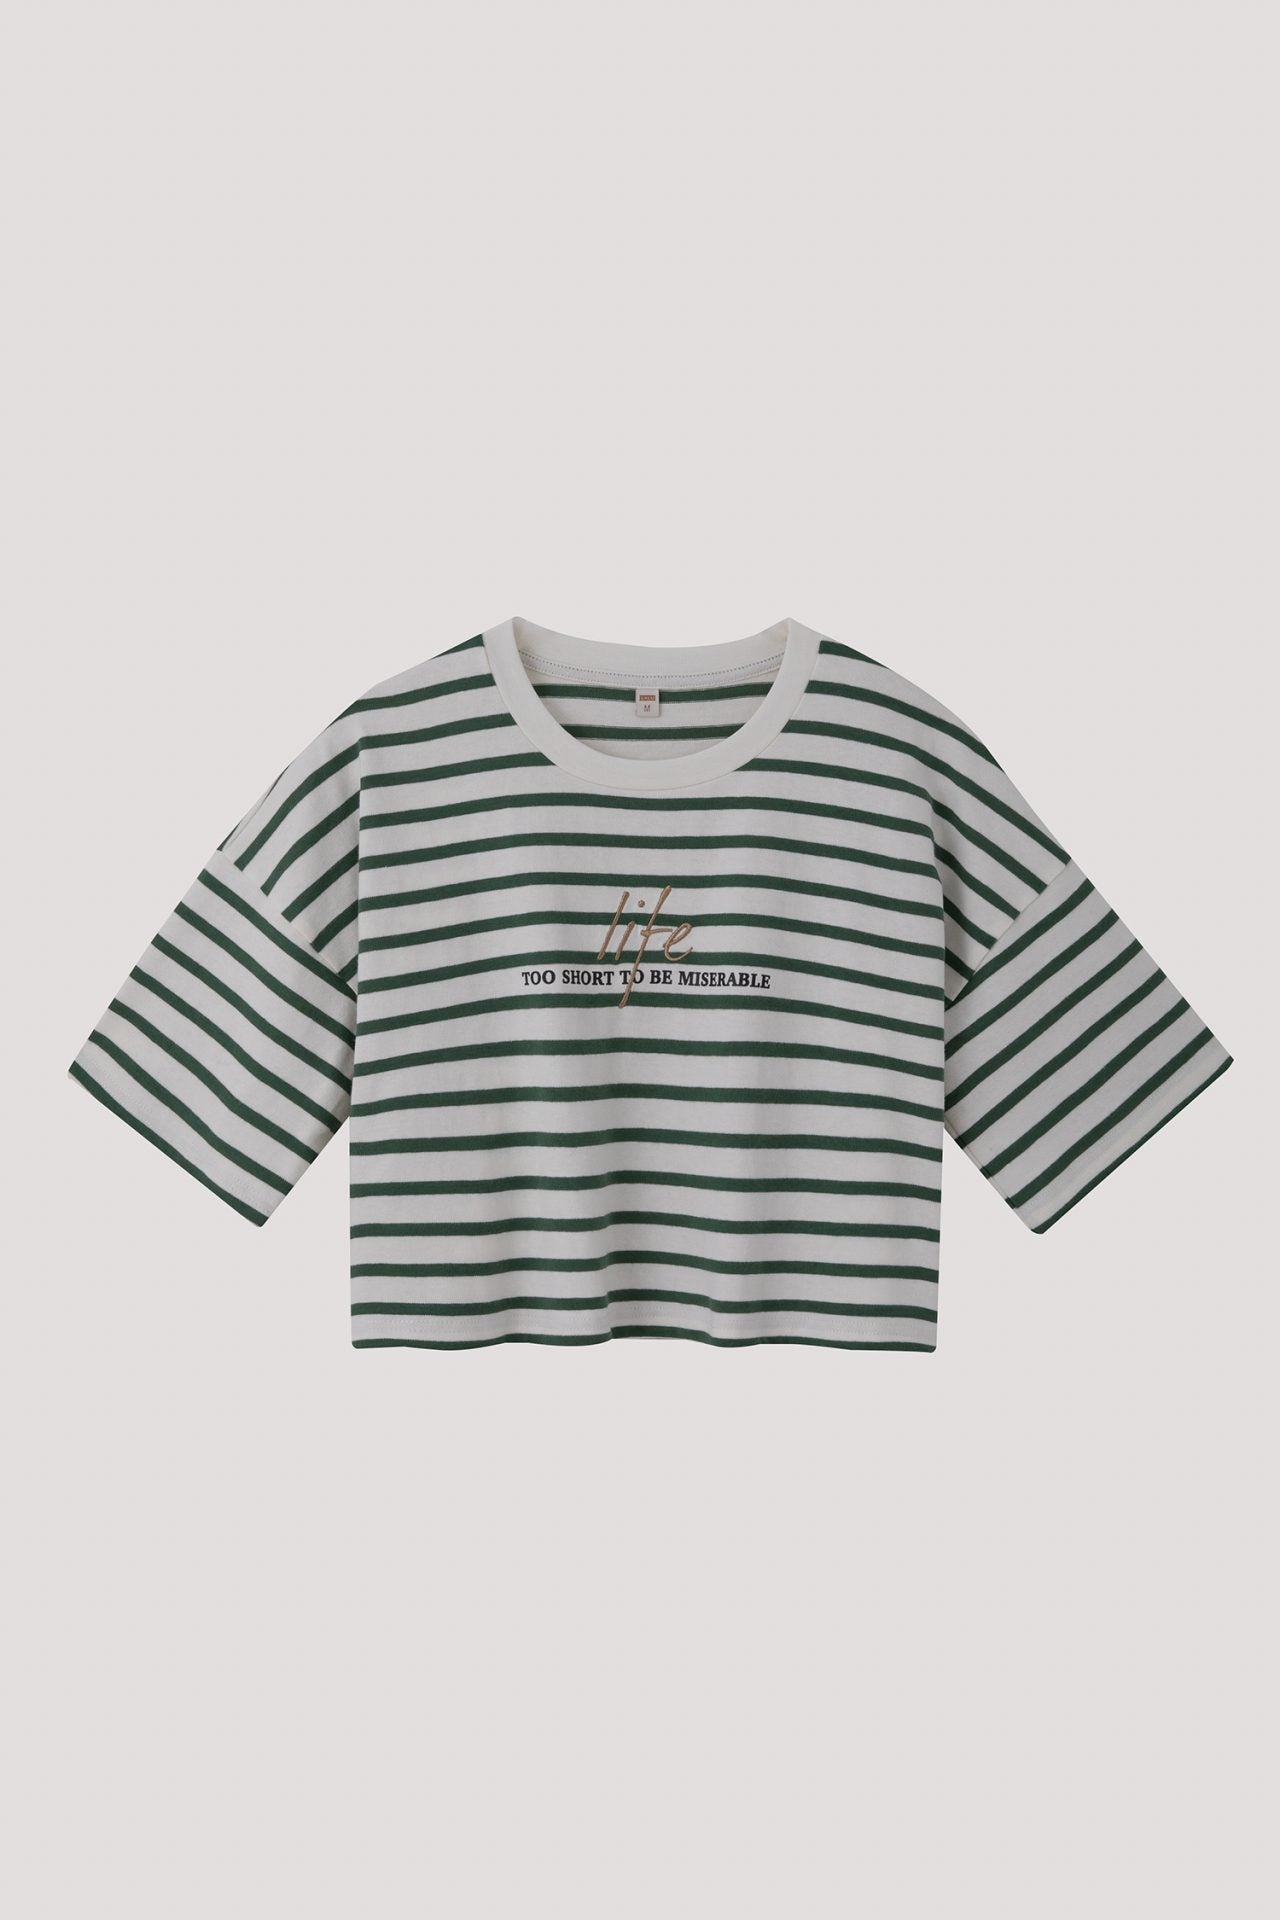 BT 11601 OVERSIZED EMBROIDERED STRIPED CROP TEE GREEN STRIPES